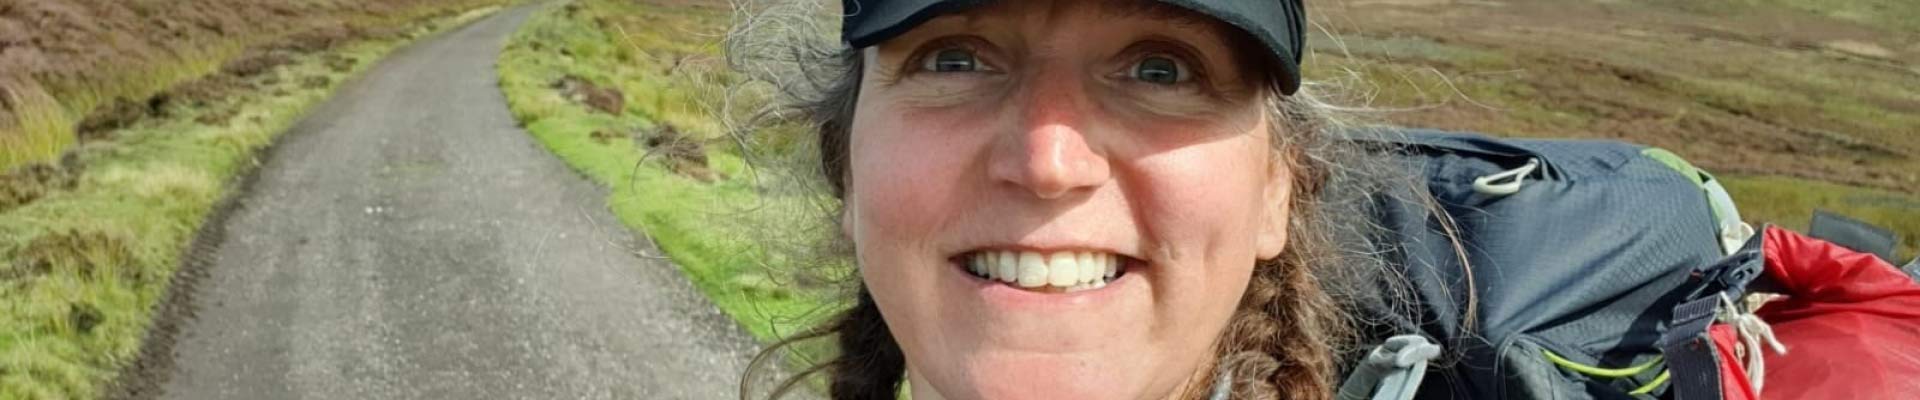 How Teaching Personnel helps this intrepid teacher juggle work with life in the great outdoors